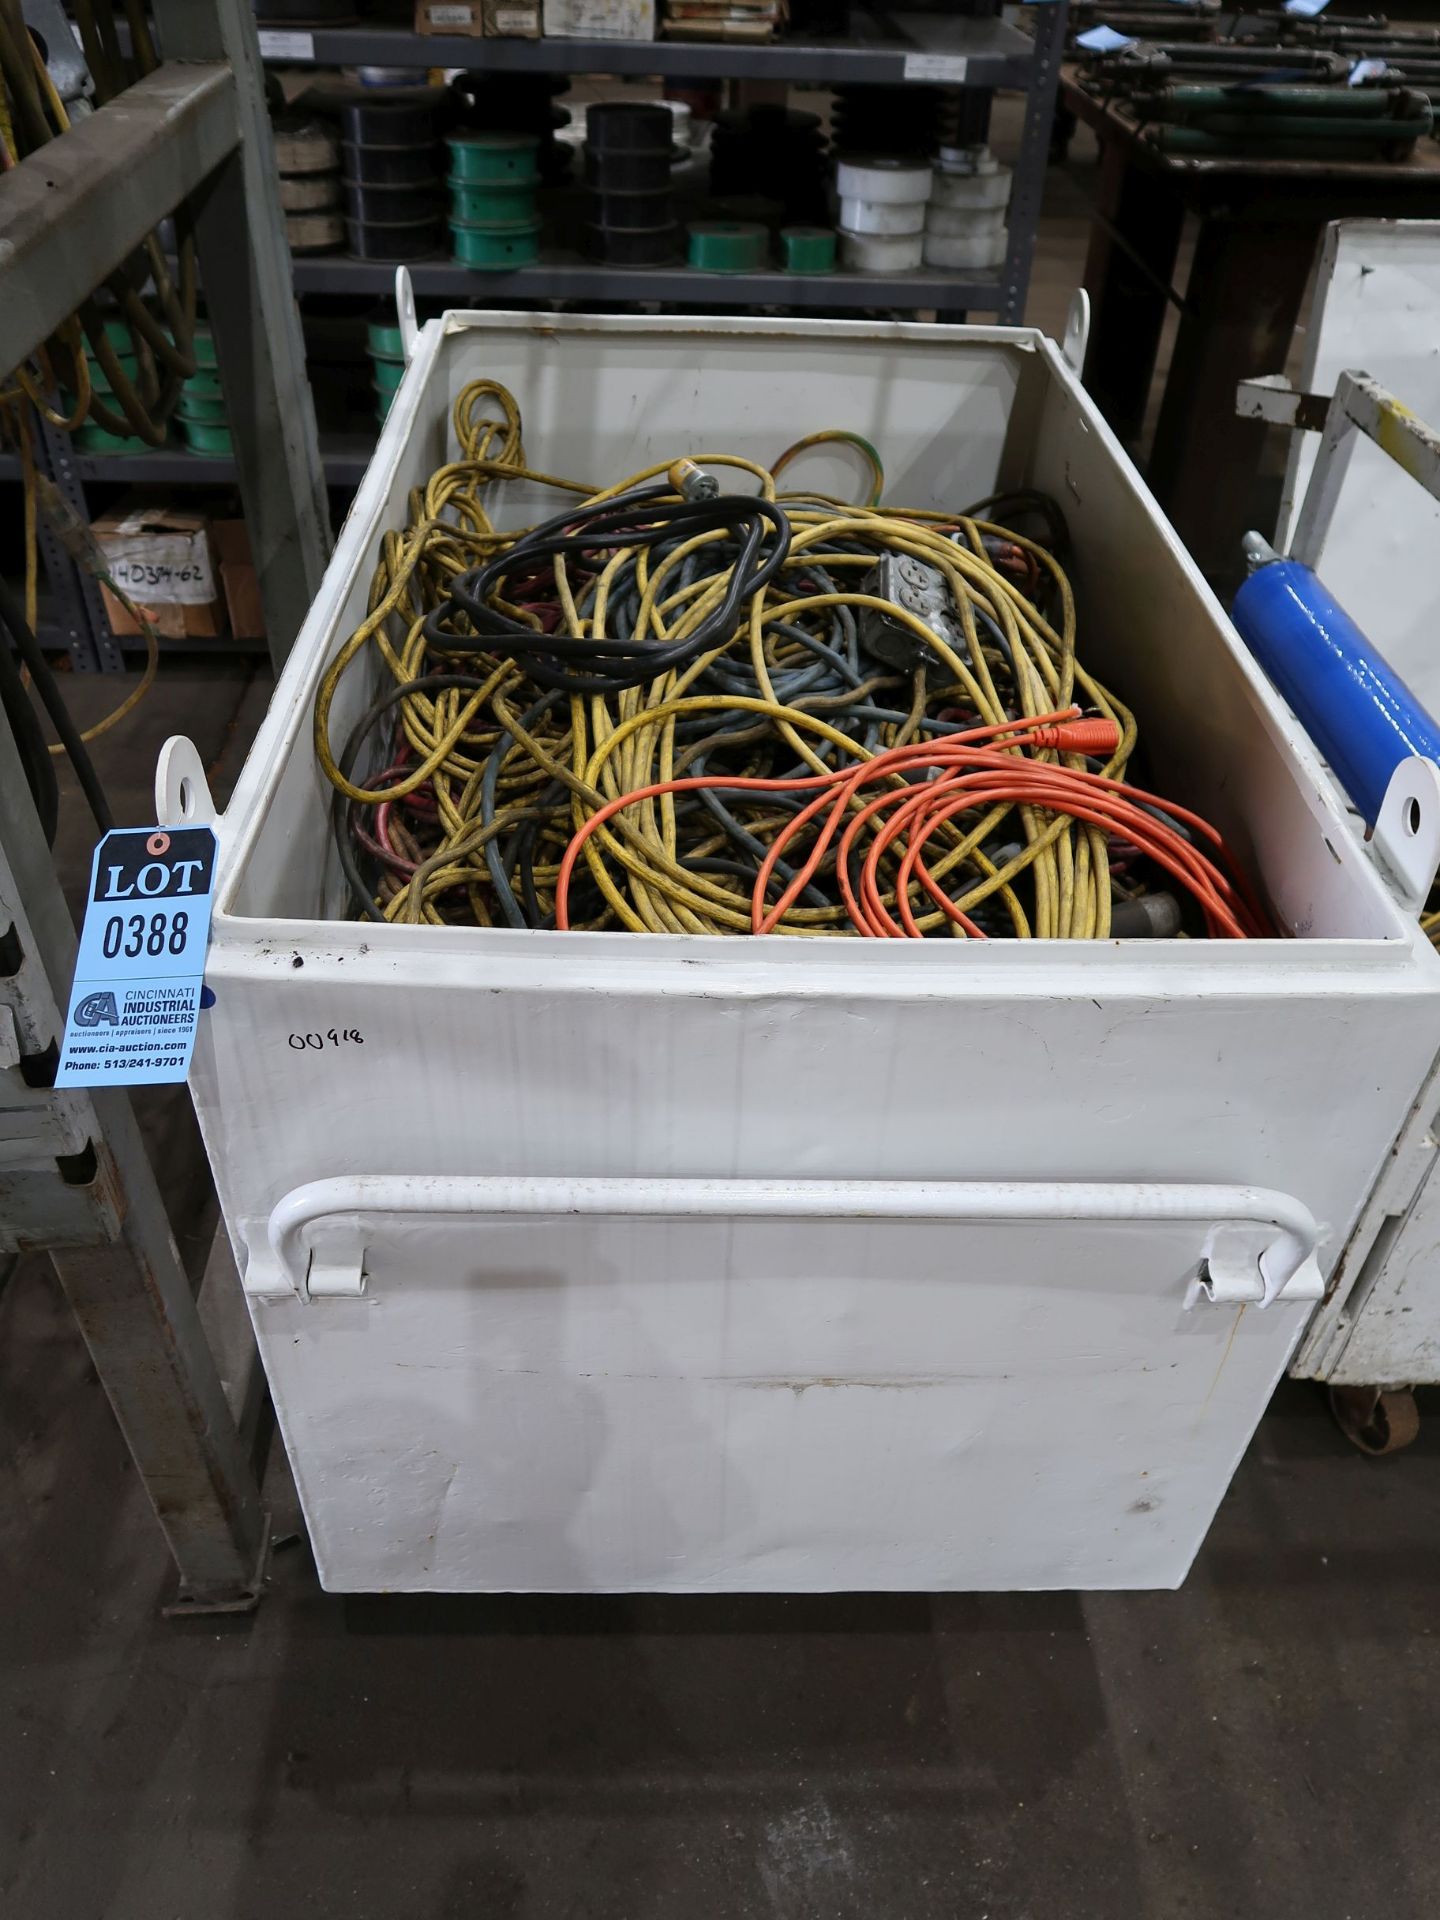 (LOT) MISCELLANEOUS ELECTRICAL CORDS WITH JOBOX